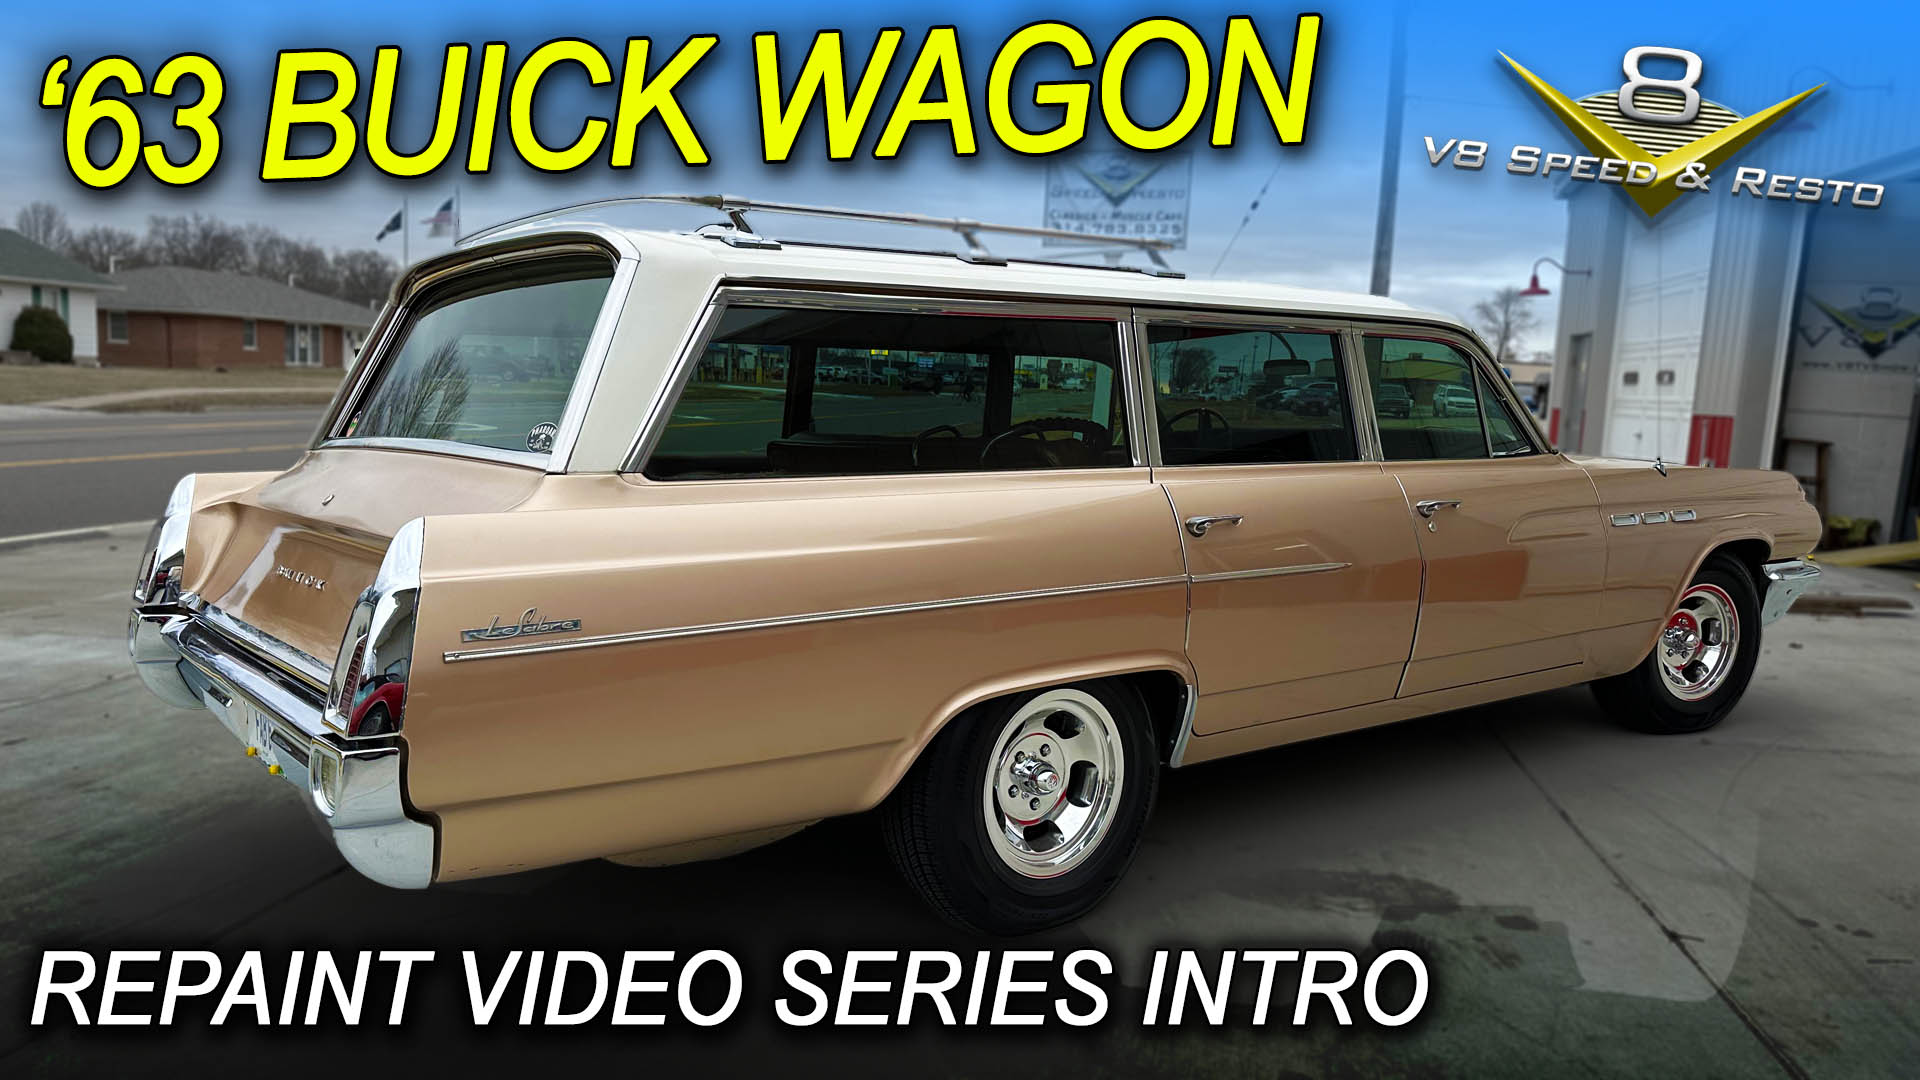 1963 Buick Wagon Repaint project video at the V8 Speed and Resto Shop